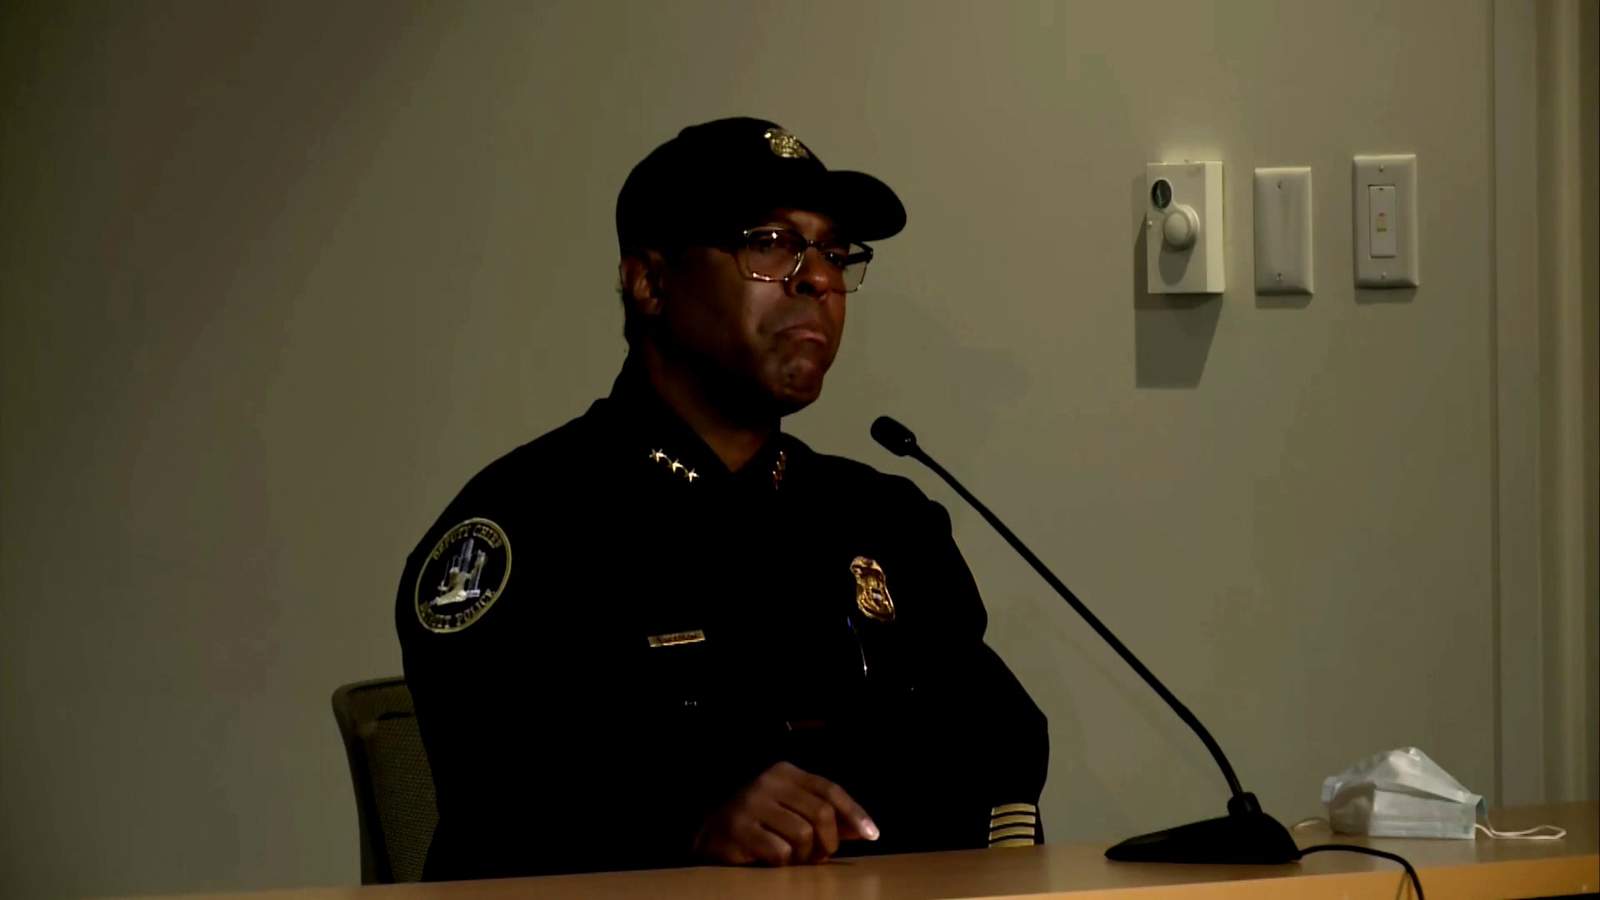 Detroit police deputy chief gets emotional speaking about taking knee with protestors